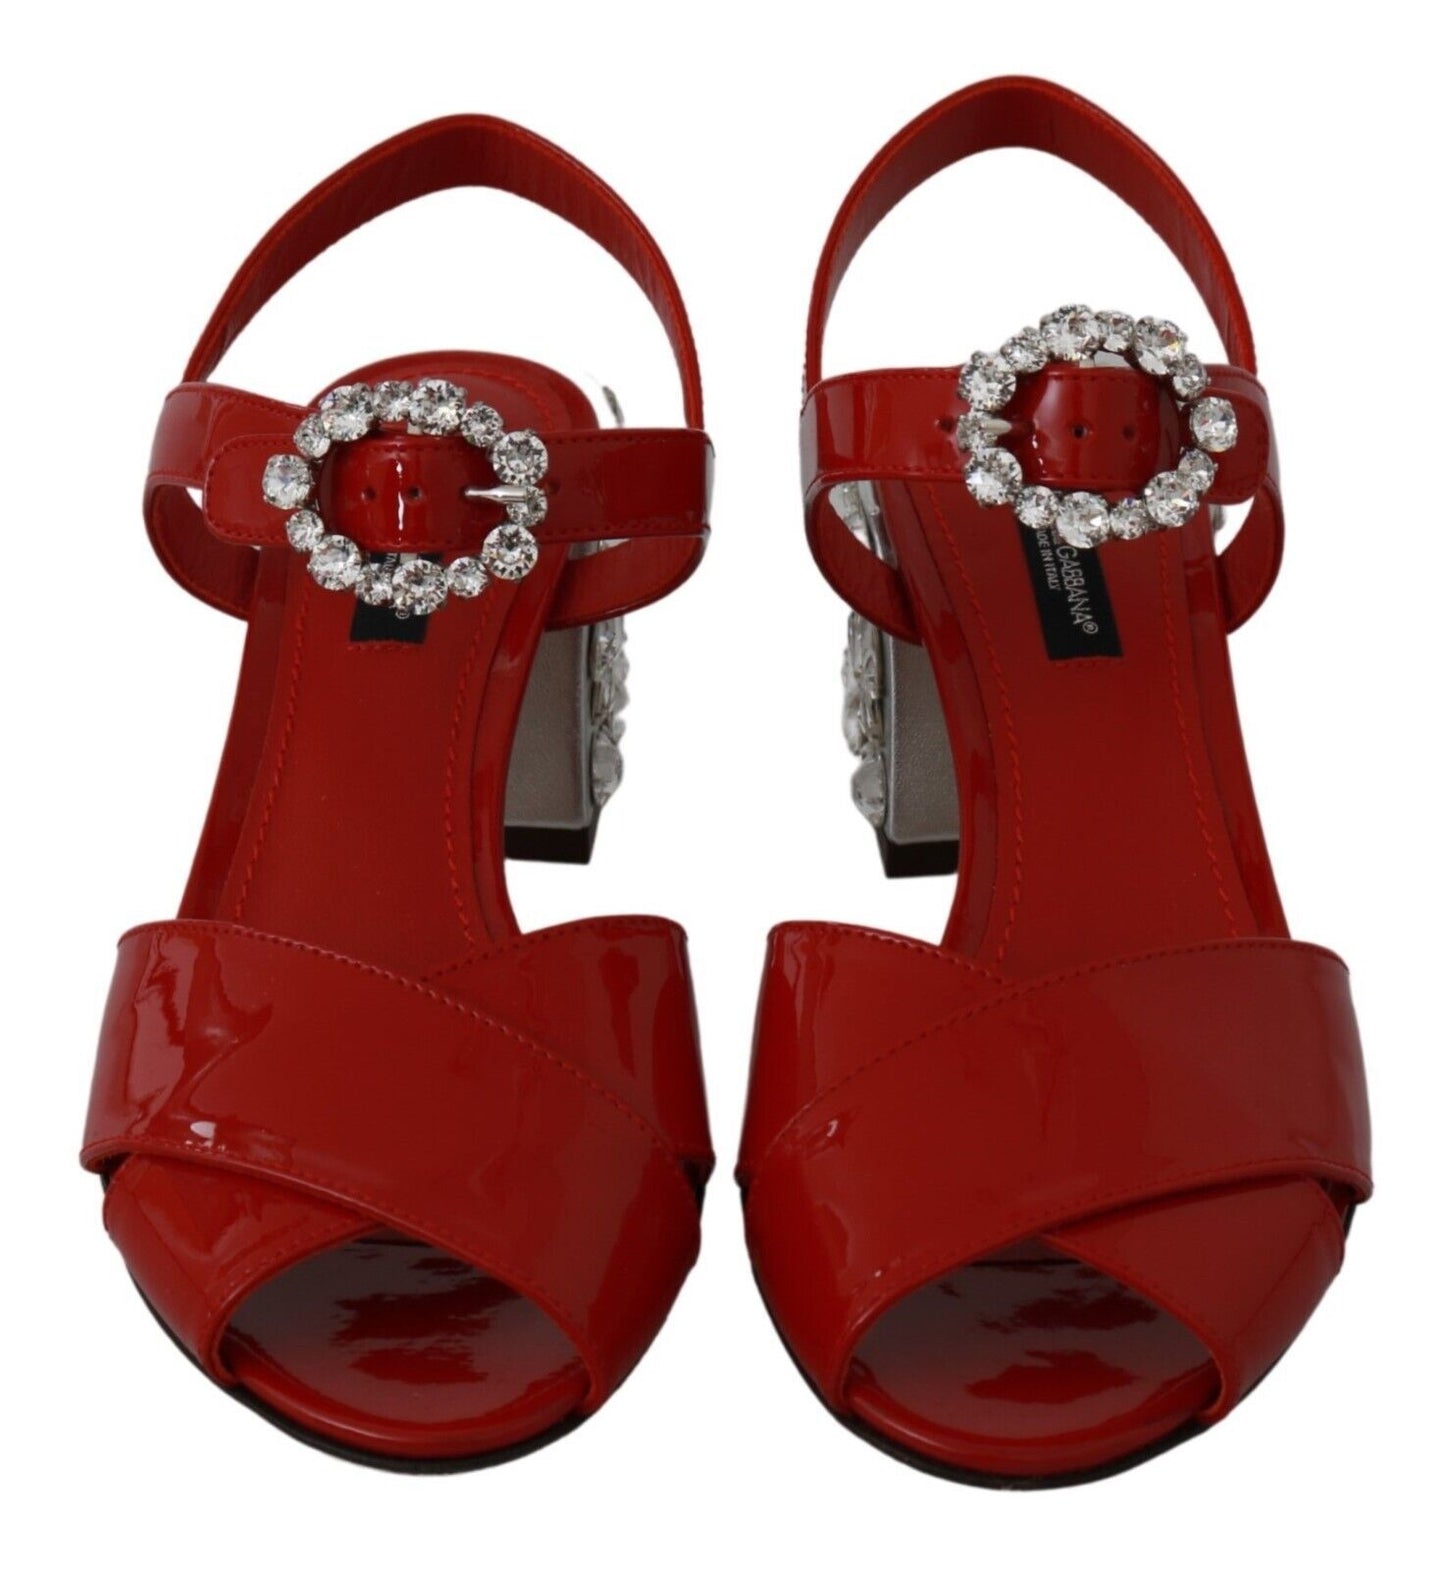 Red Leather Crystal Heels Sandals